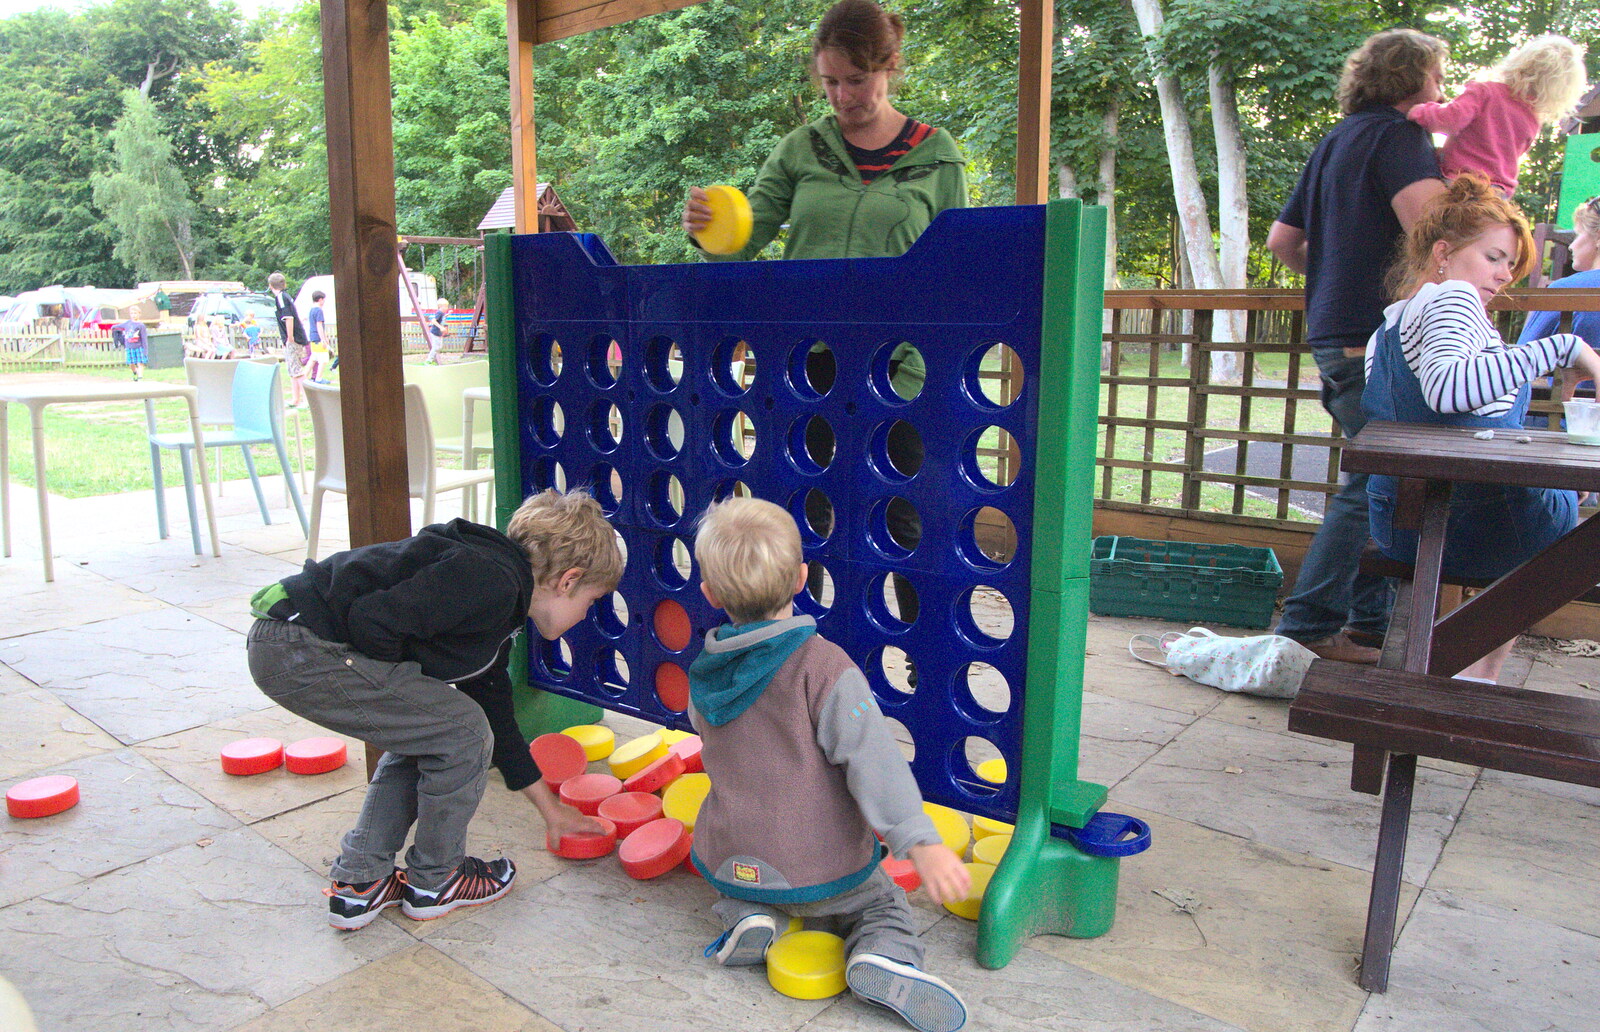 Isobel and the boys play giant Connect 4 from The Archaeology of Dunwich: A Camping Trip, Dunwich, Suffolk - 1st August 2015